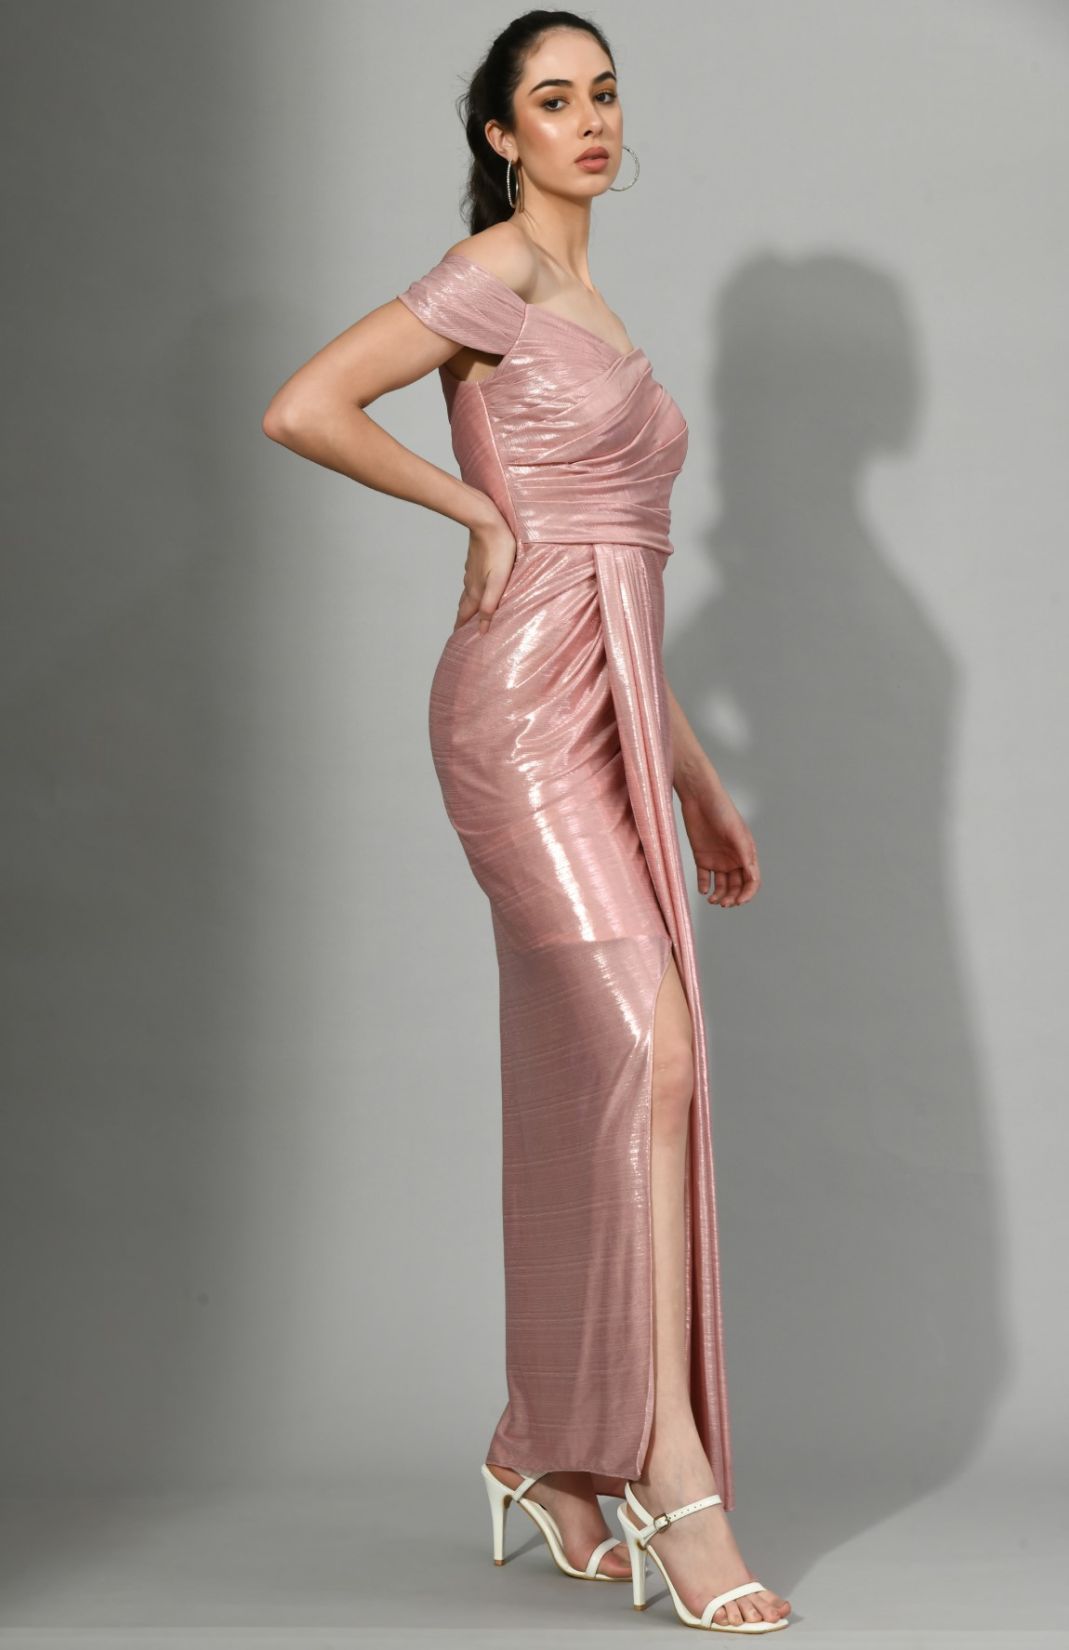 Glitz N Glam - Draped Gown With Slit In Metallic Pink